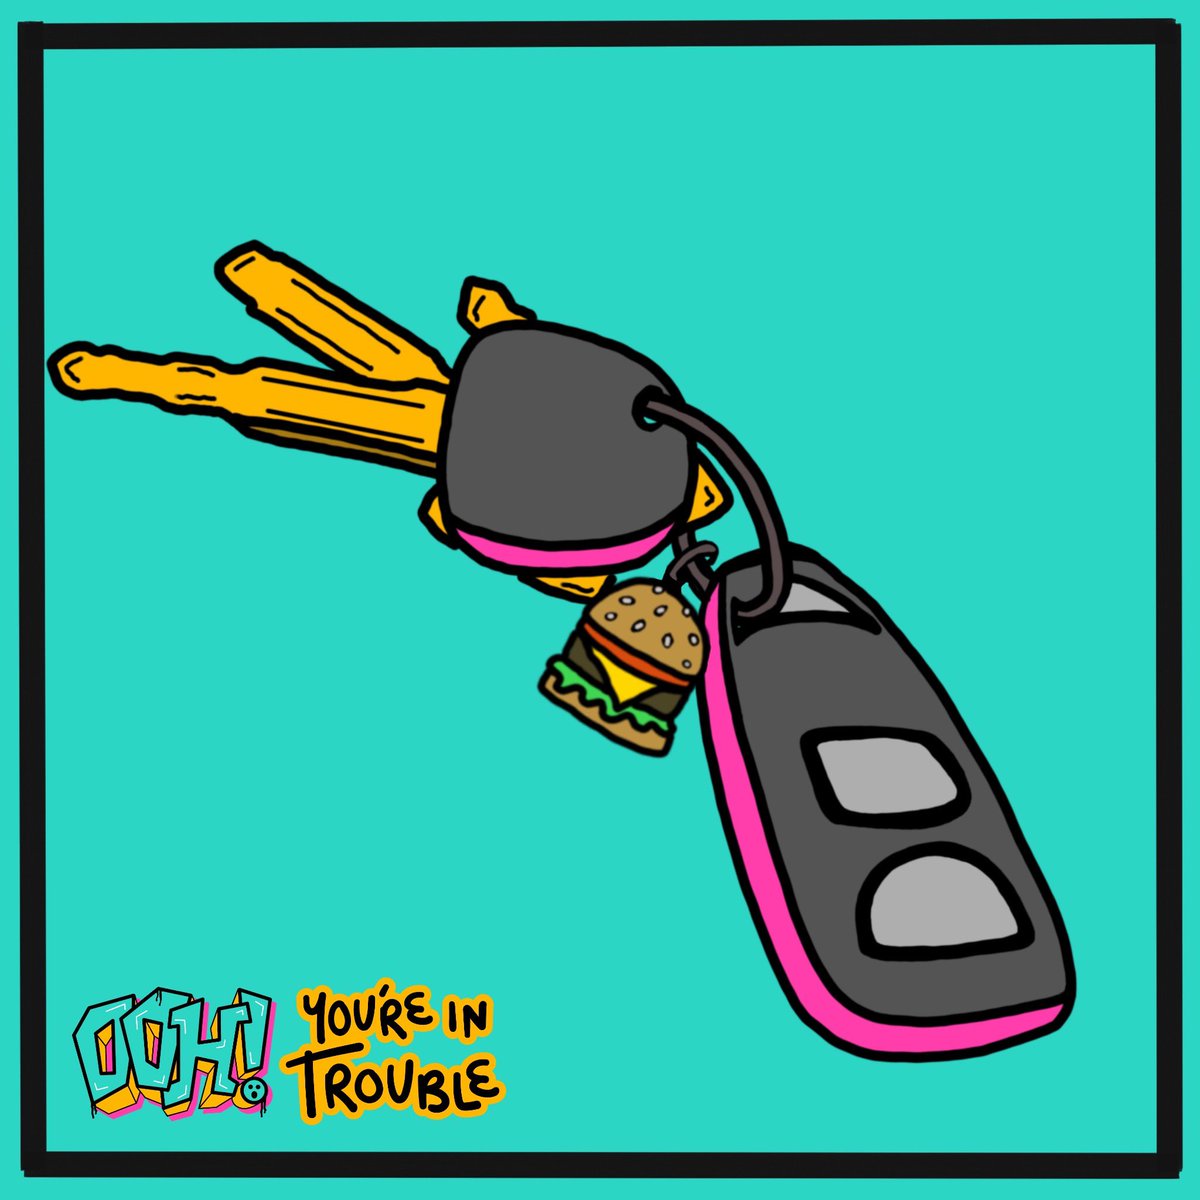 Is it ok to “borrow” your parents car if you don’t have a license? A story of friendship, farm lands & fast food 🍔. #podcastforkids #podcastsforkids (Final episode before our hiatus; more episodes later this Spring) listentotrouble.com